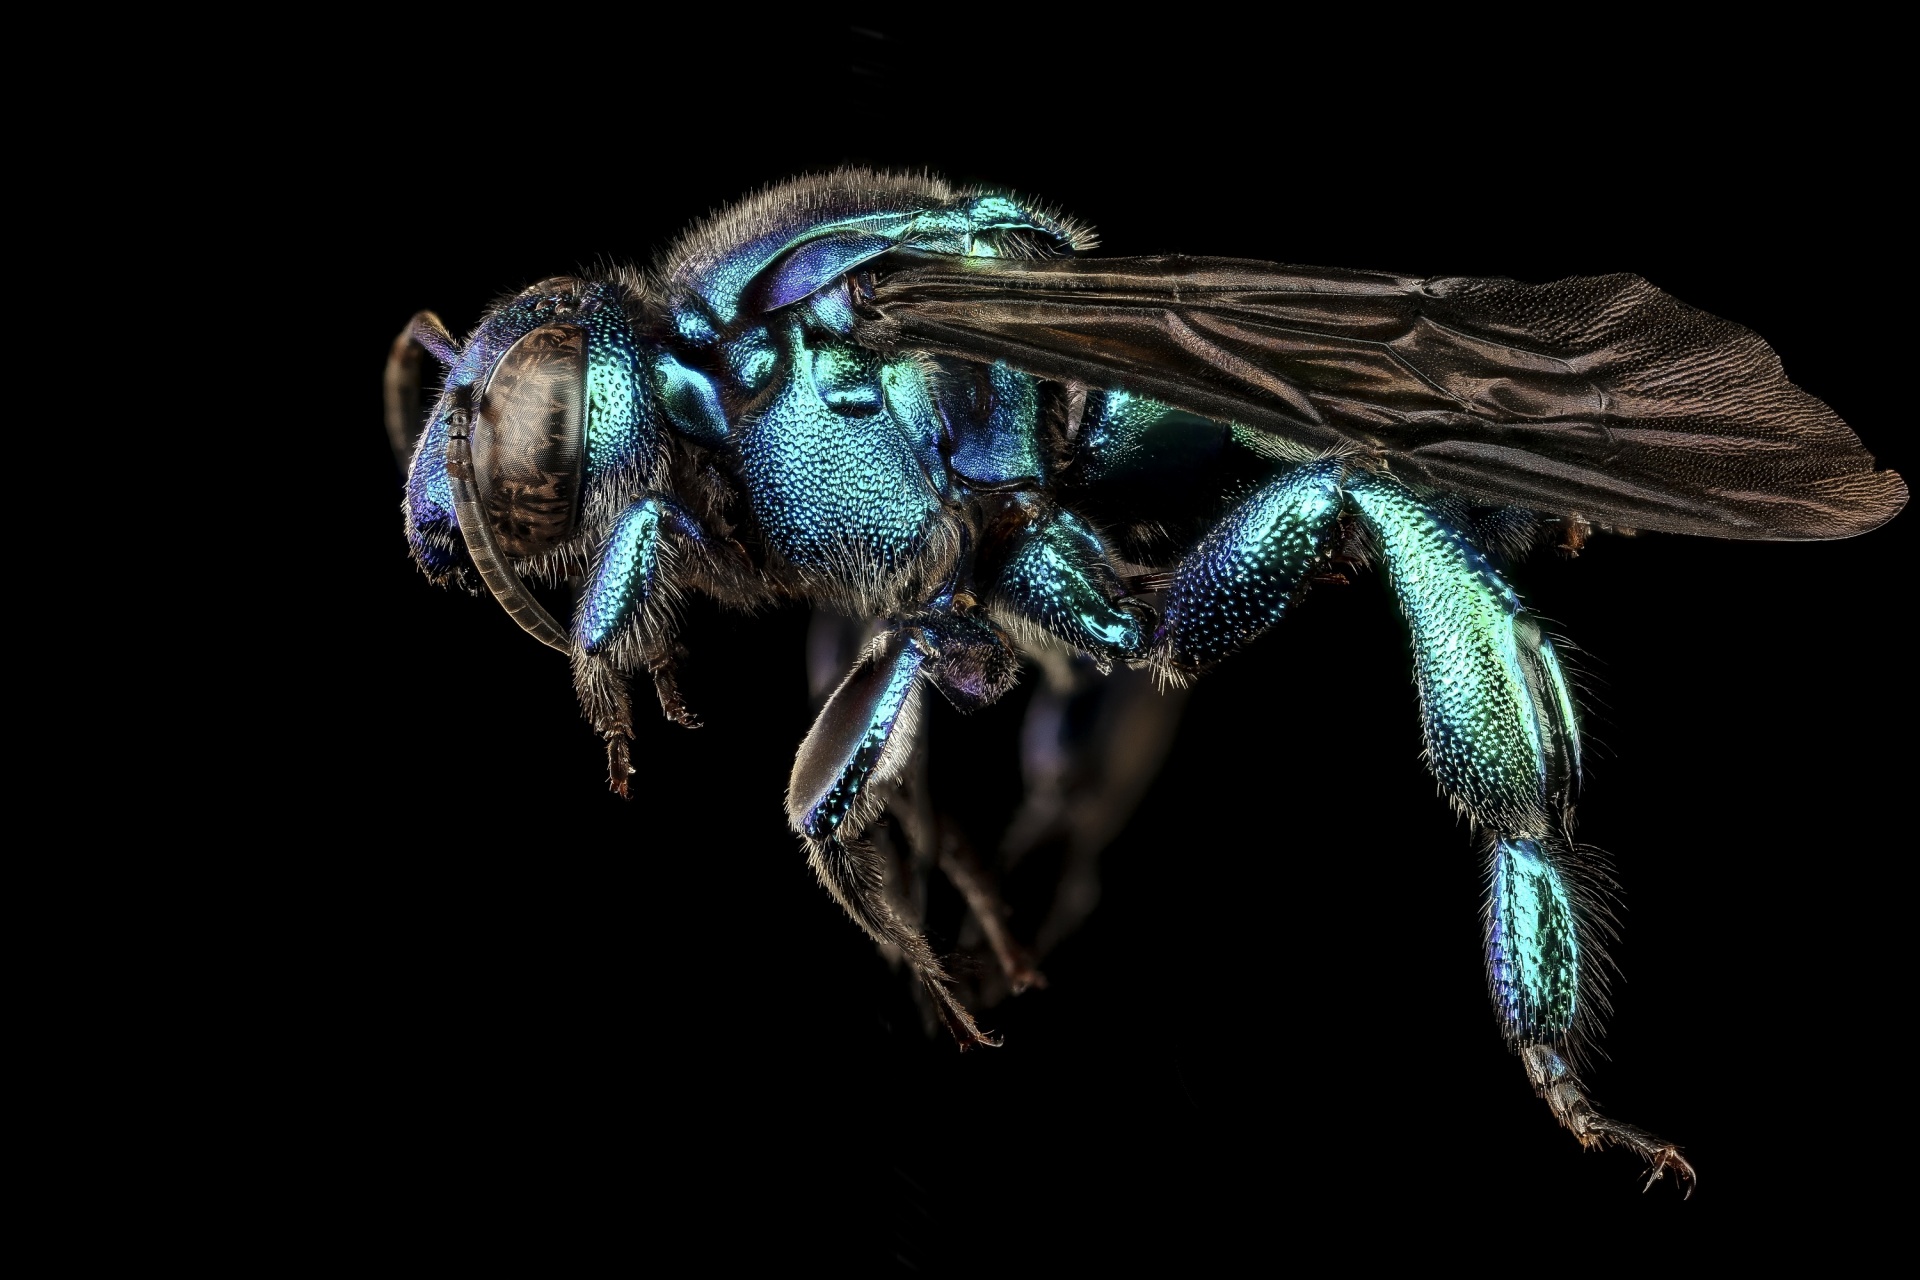 Macro View of a Mounted Bee